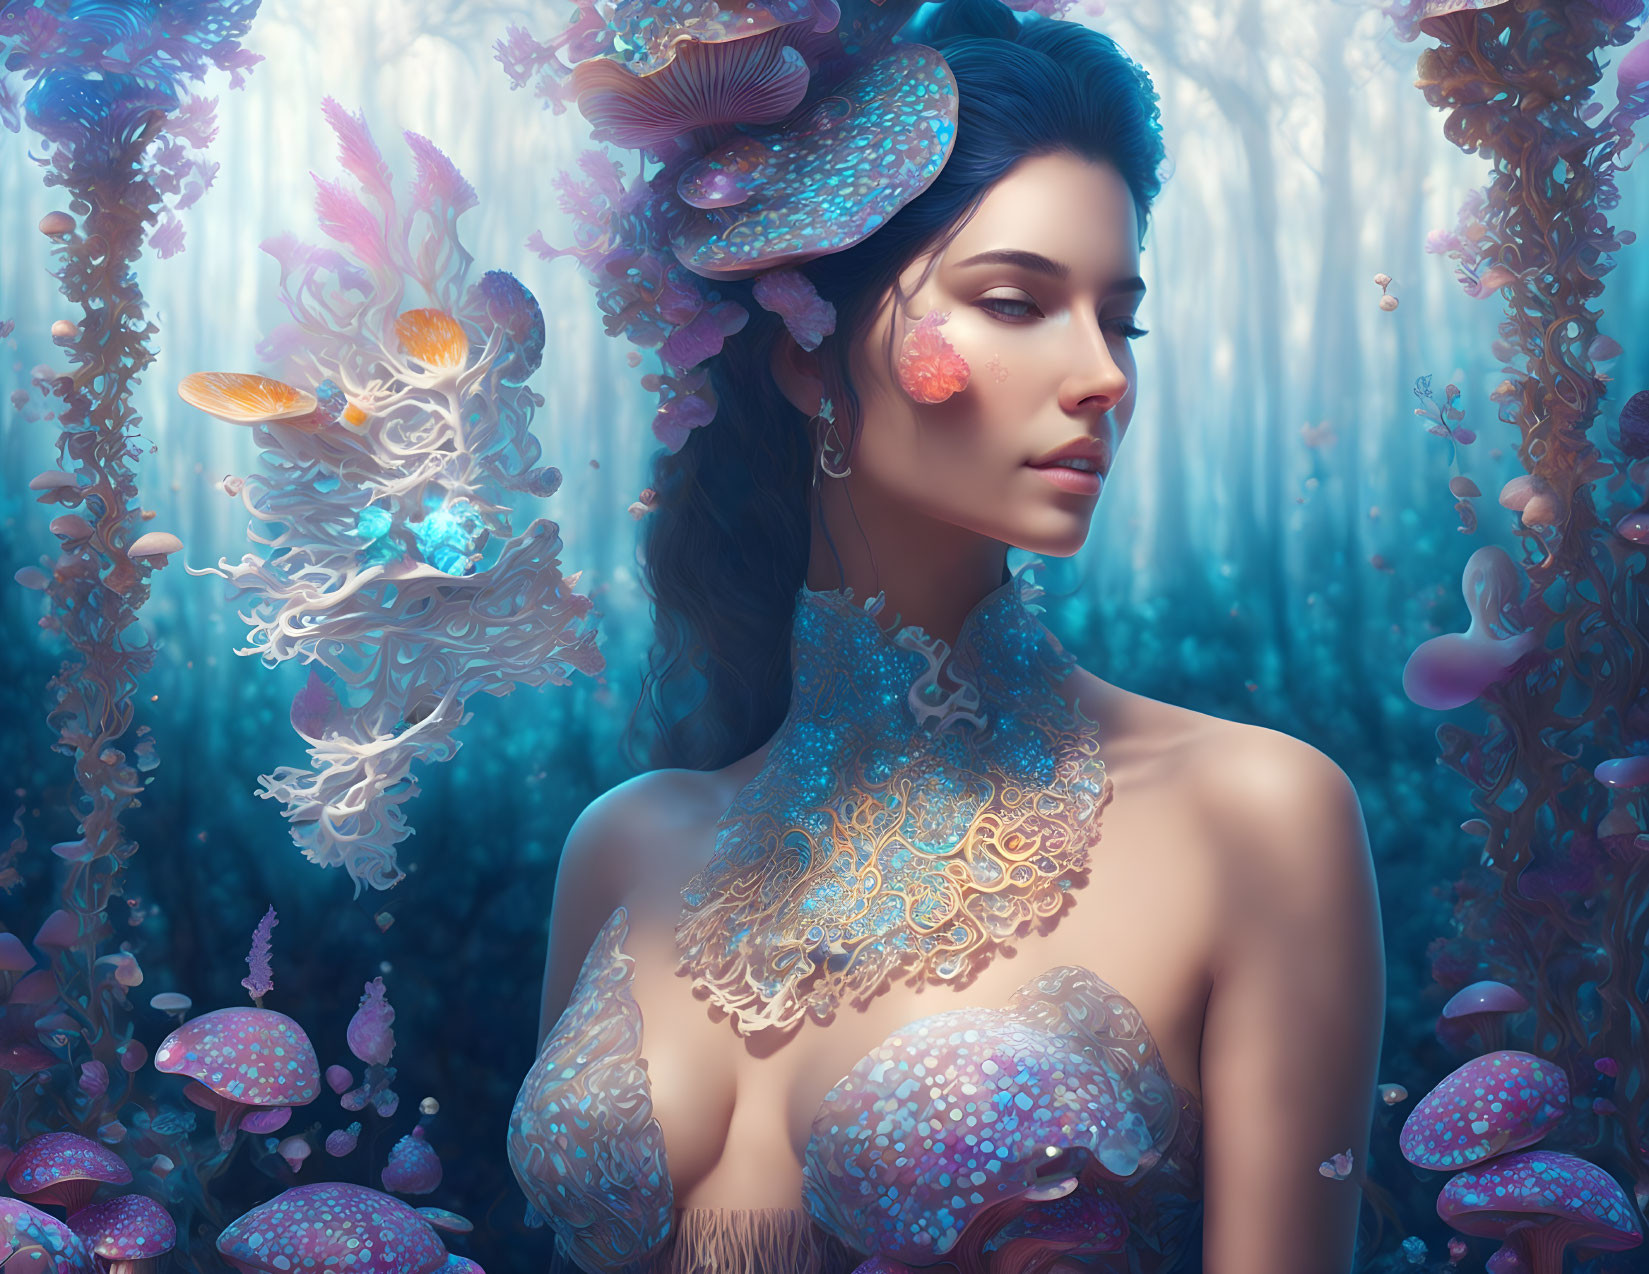 Mystical woman adorned with marine-themed elements in underwater scene